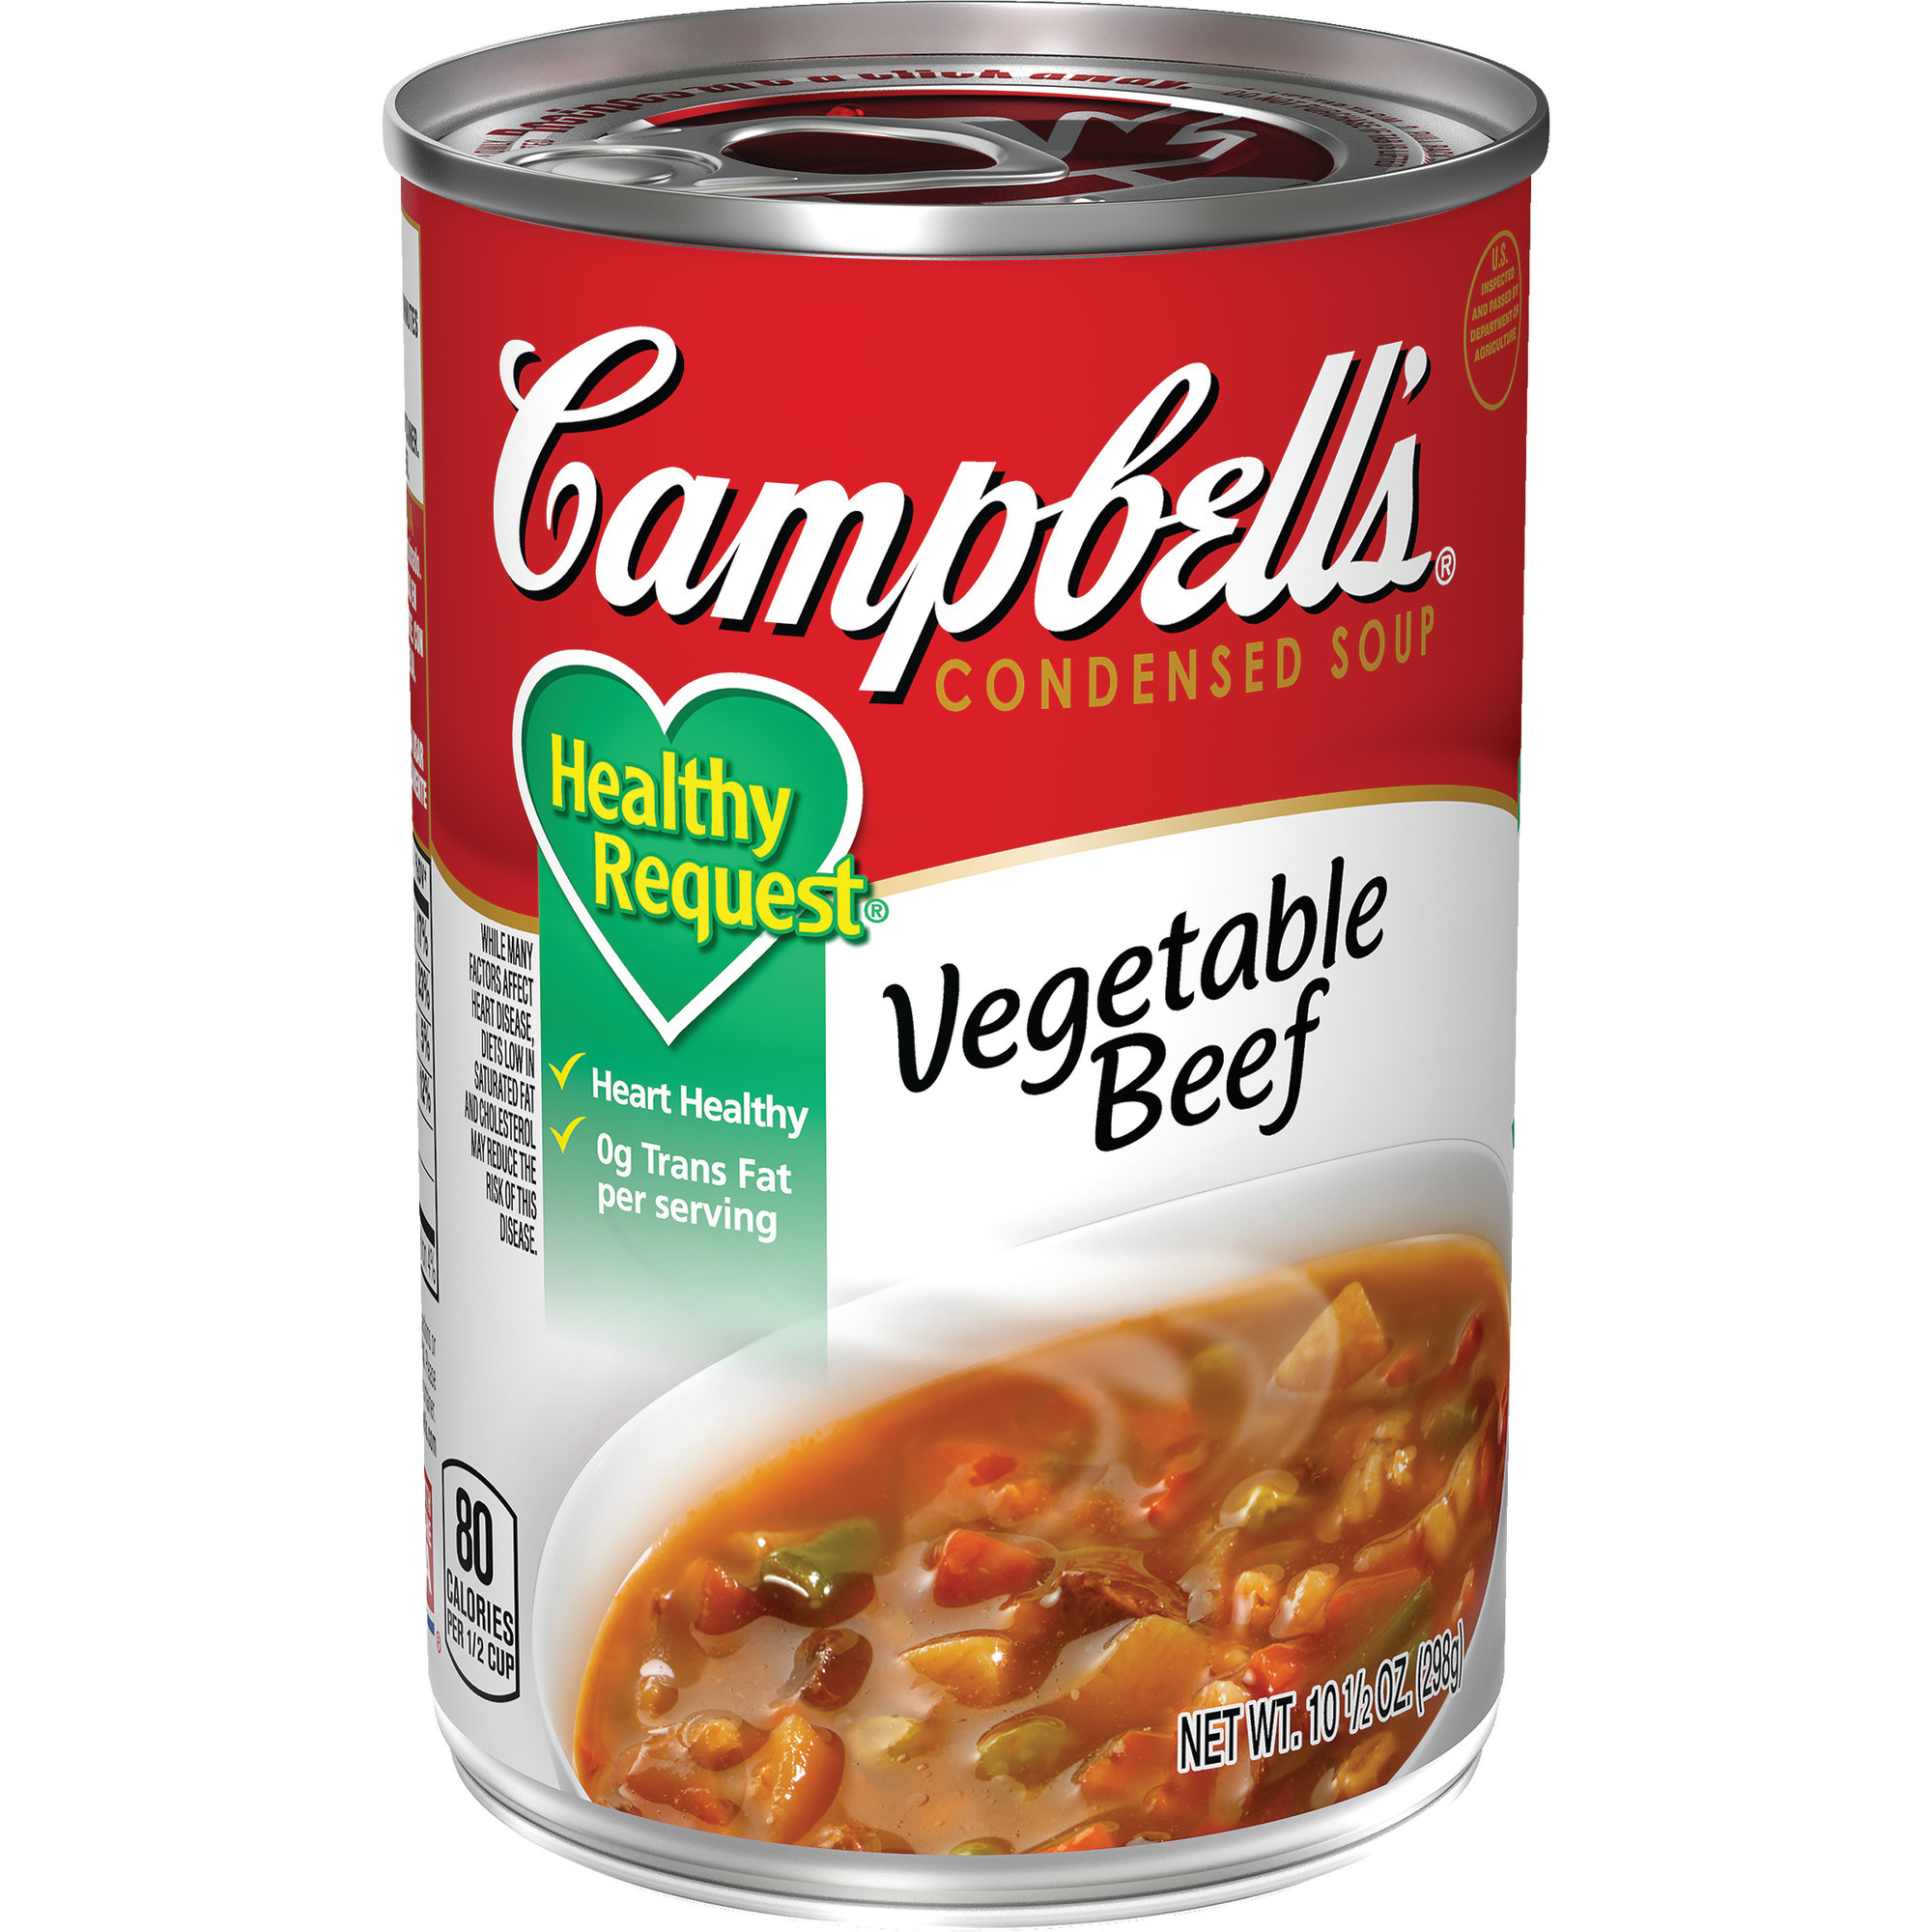 Top 15 Campbell's Vegetable Beef soup